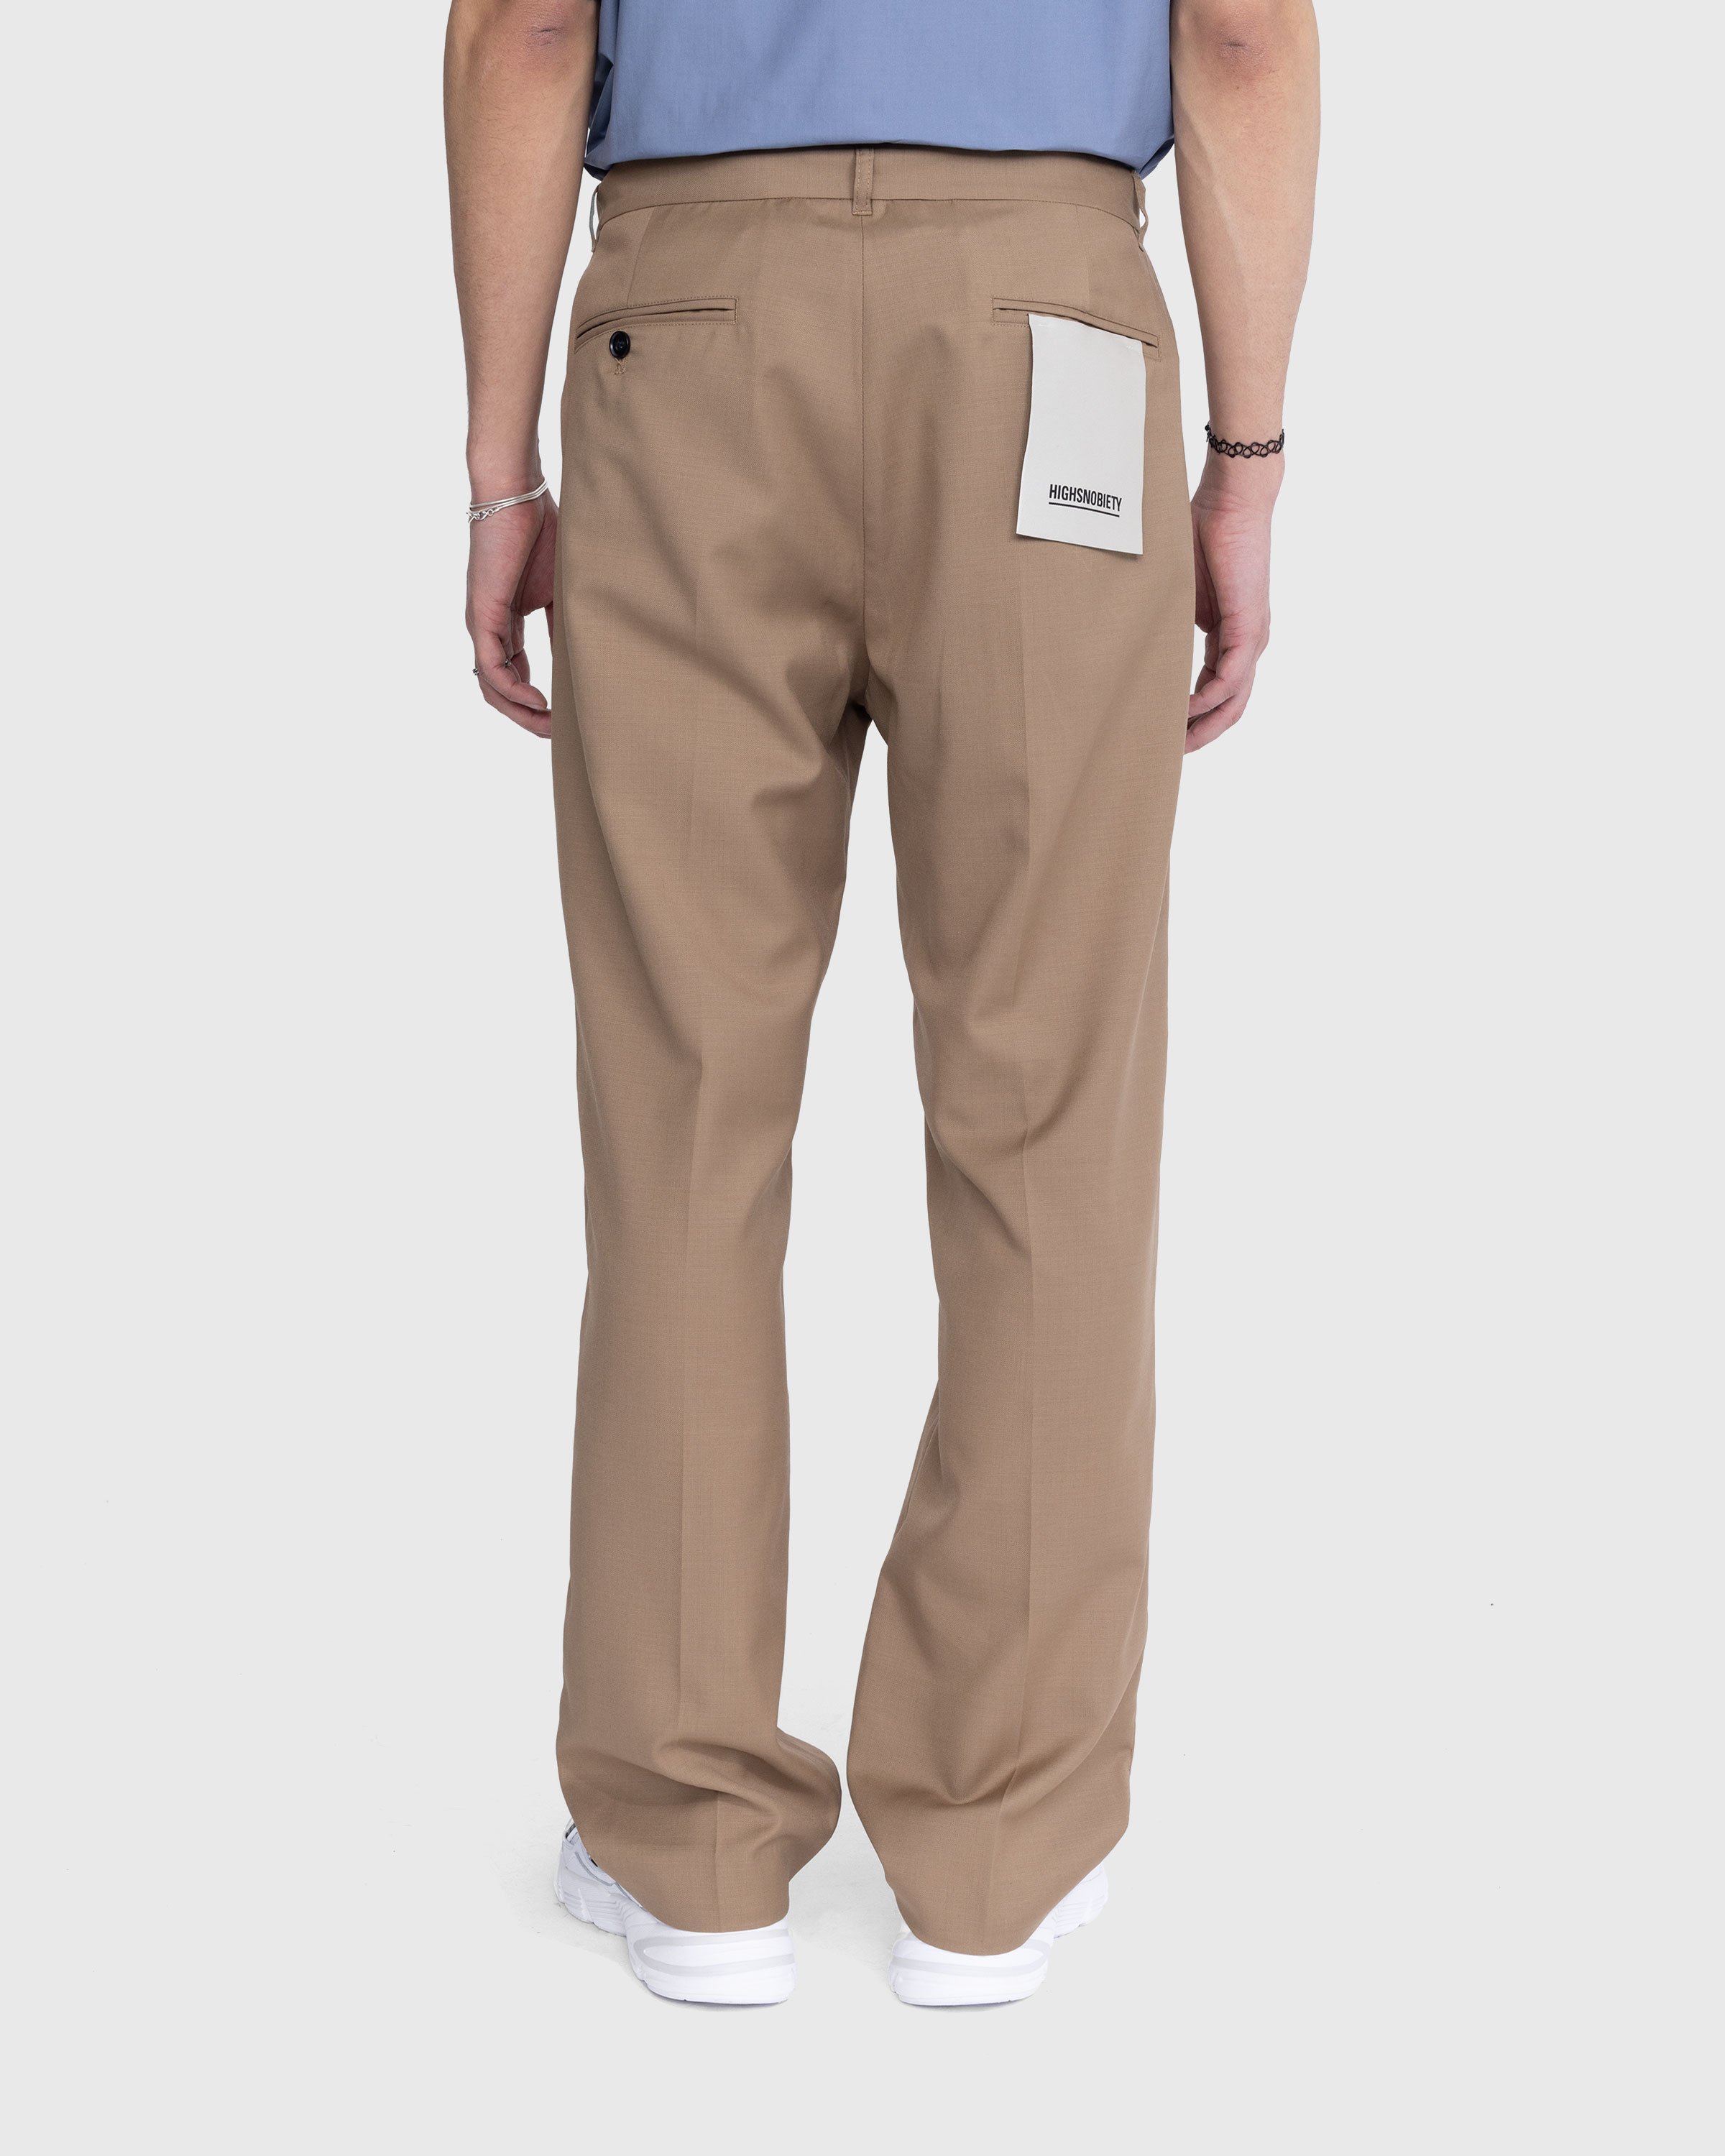 Highsnobiety - Tropical Wool Suiting Pants Sand - Clothing - Beige - Image 5